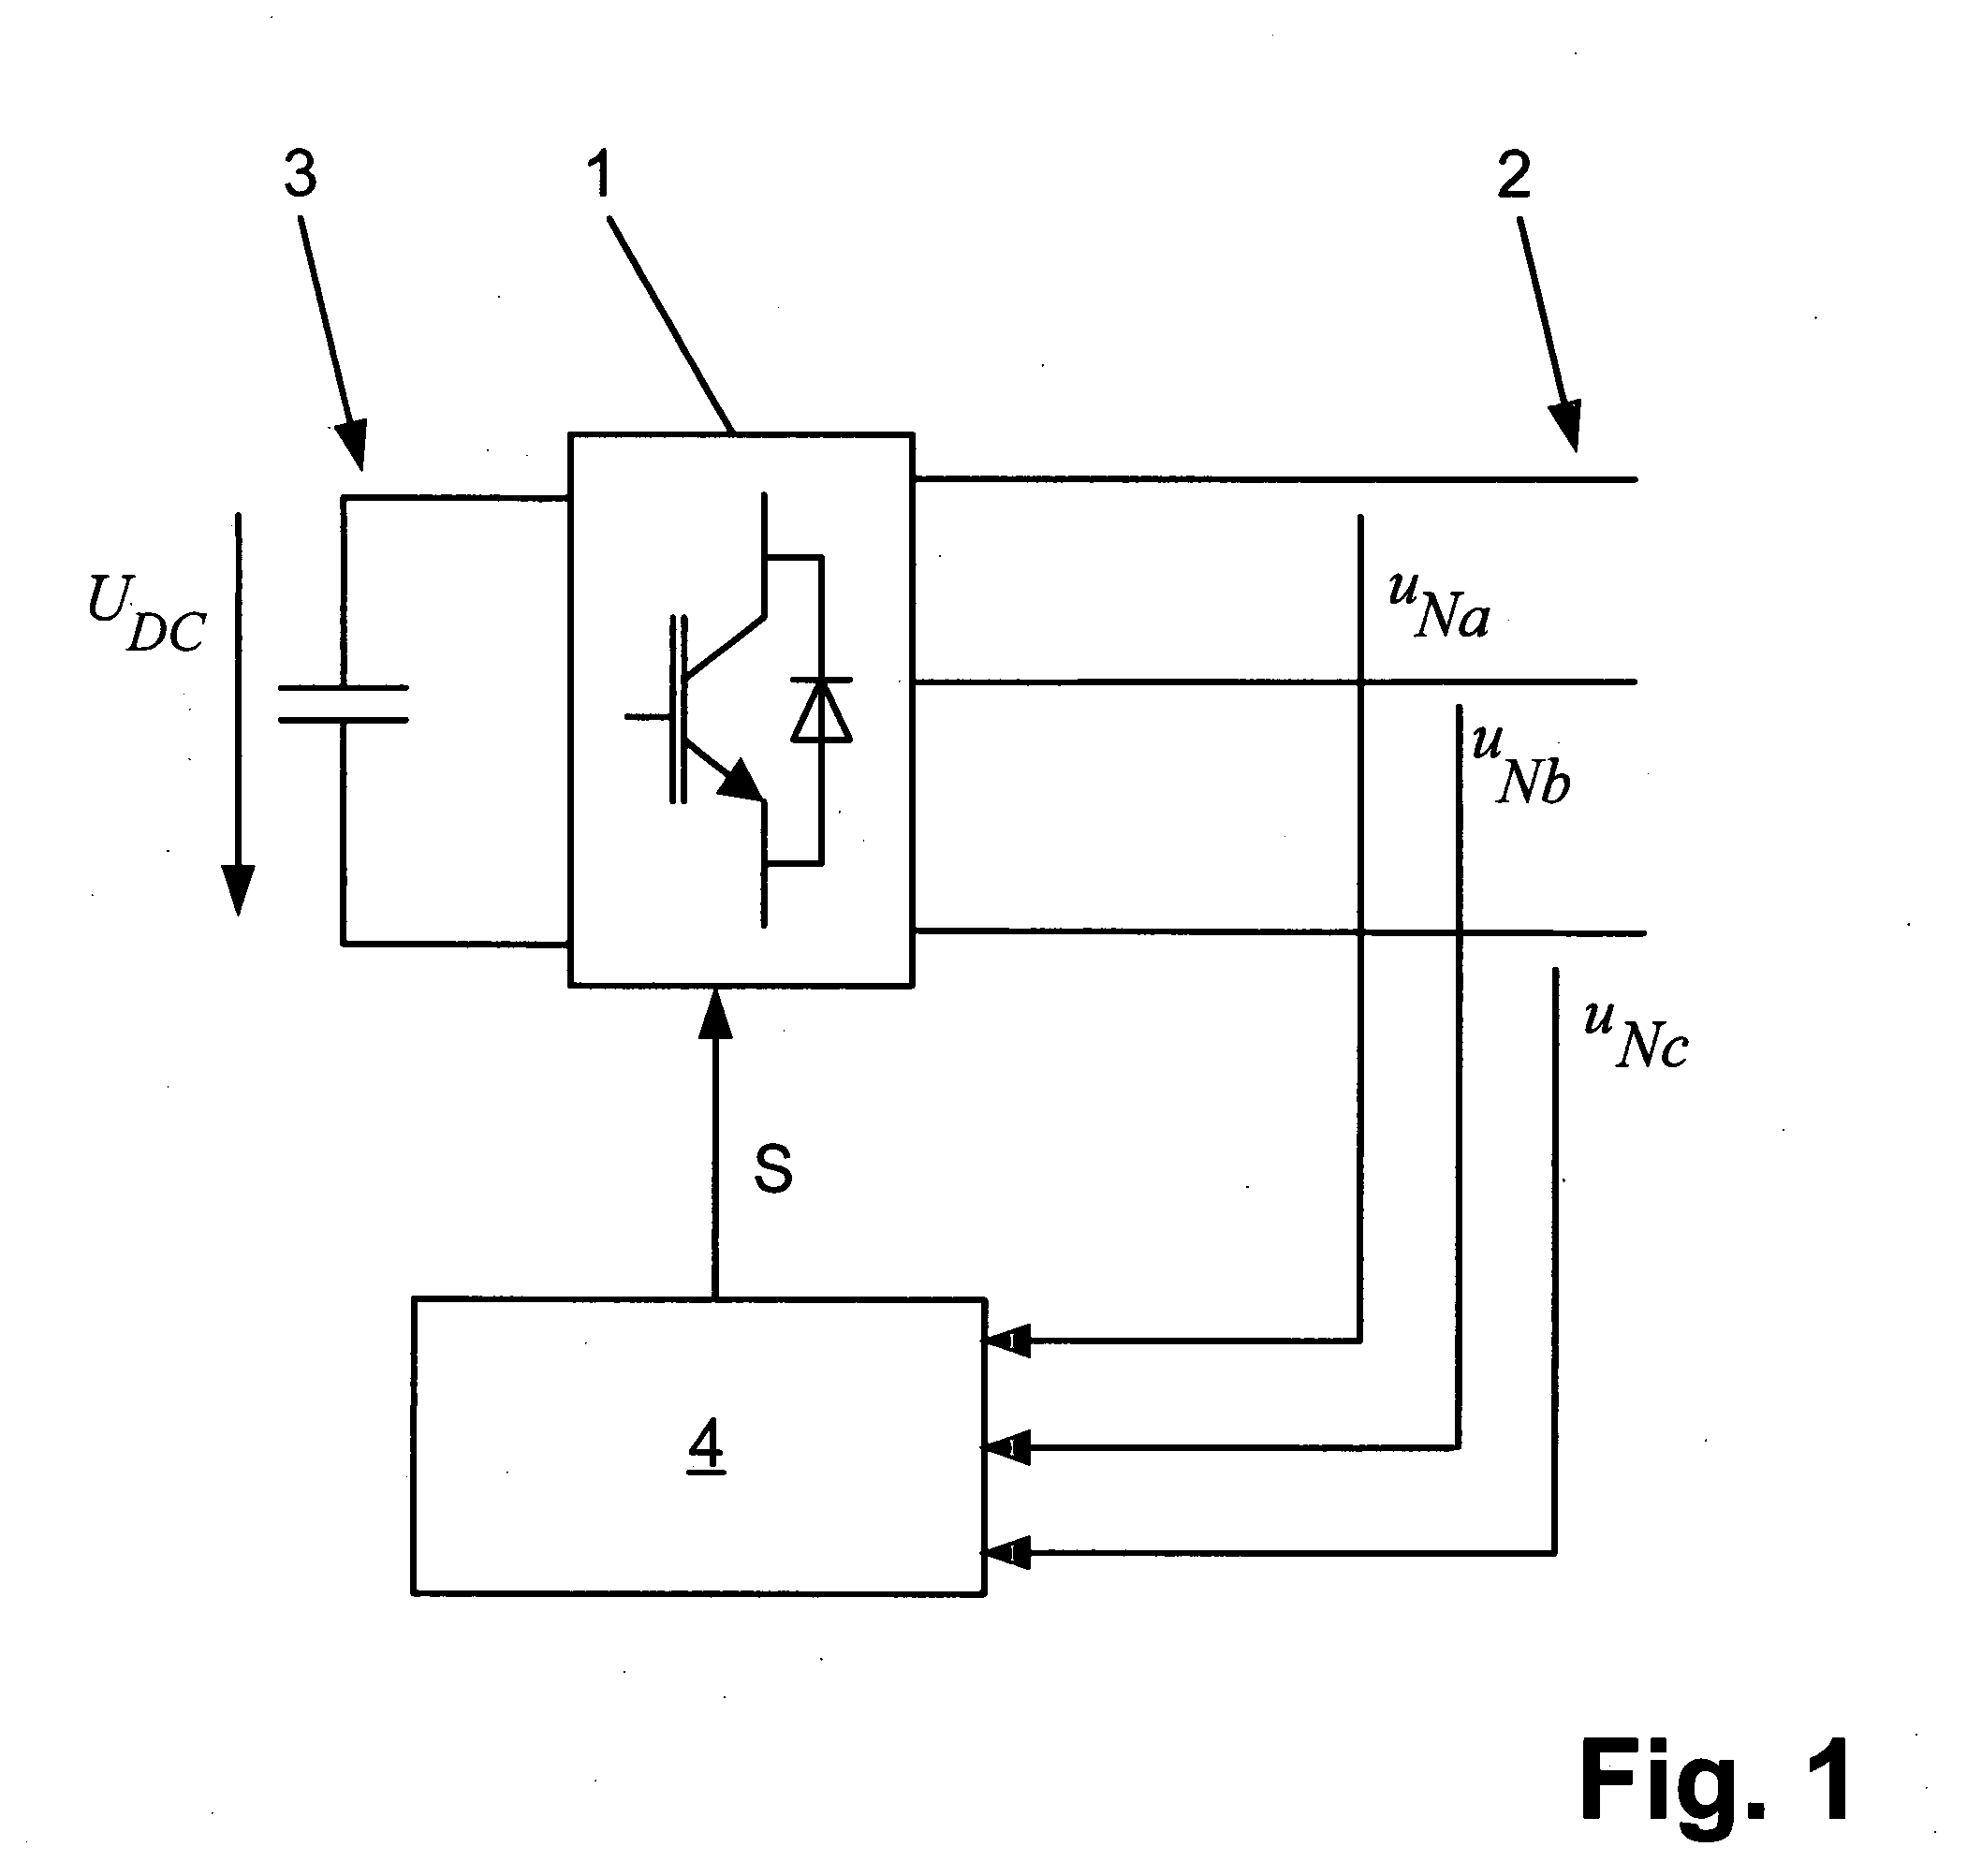 Method of operating a converter circuit